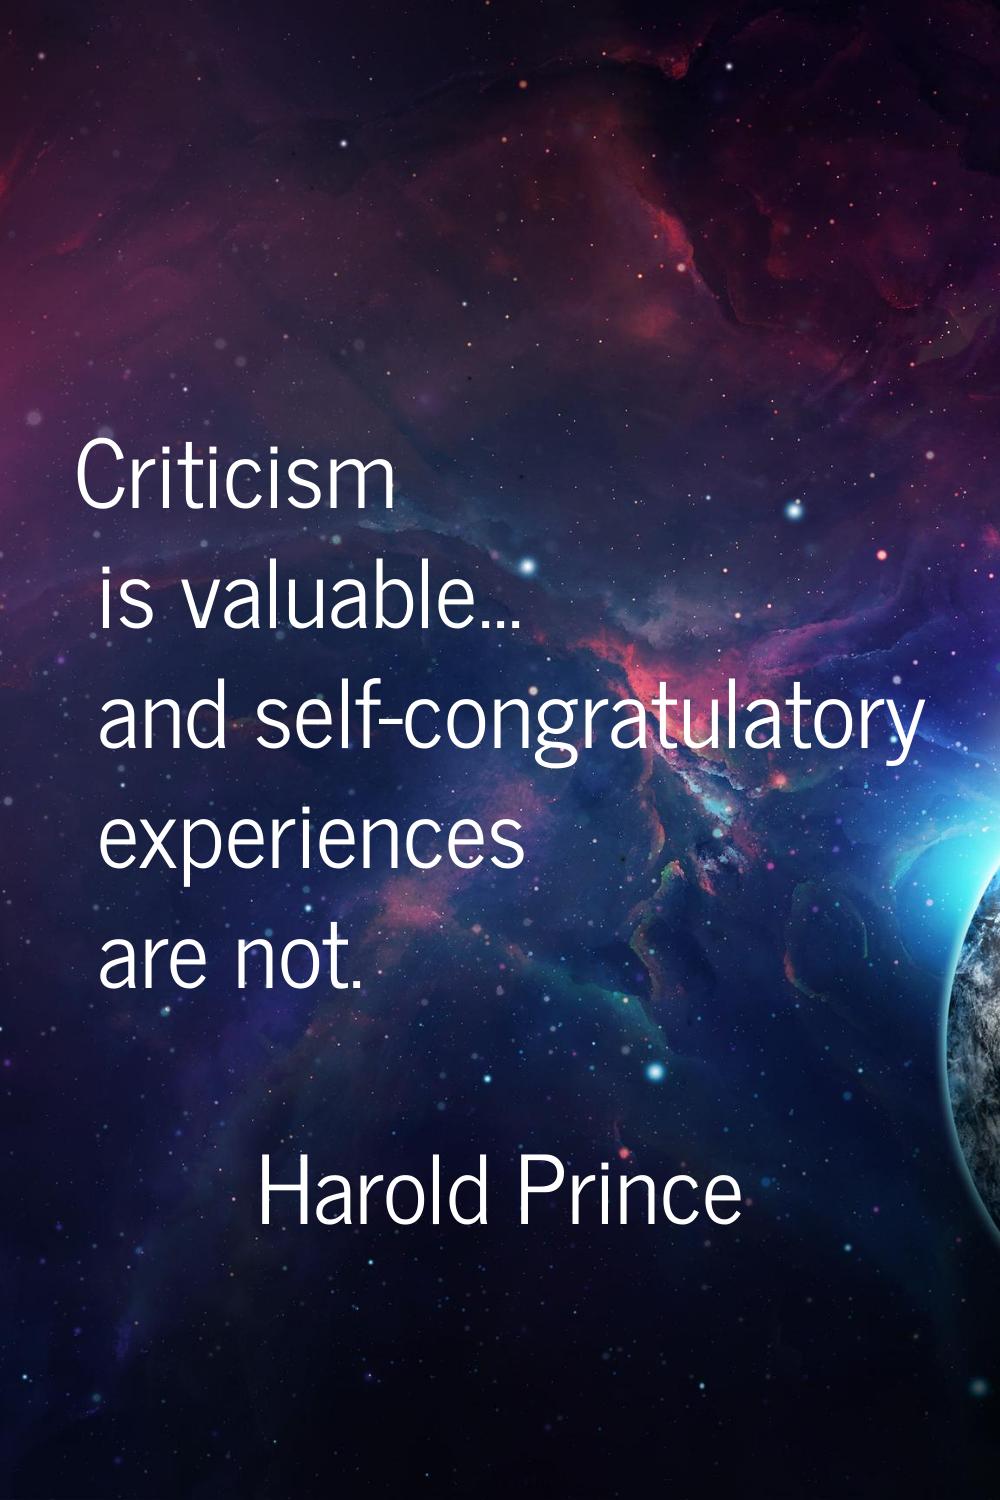 Criticism is valuable... and self-congratulatory experiences are not.